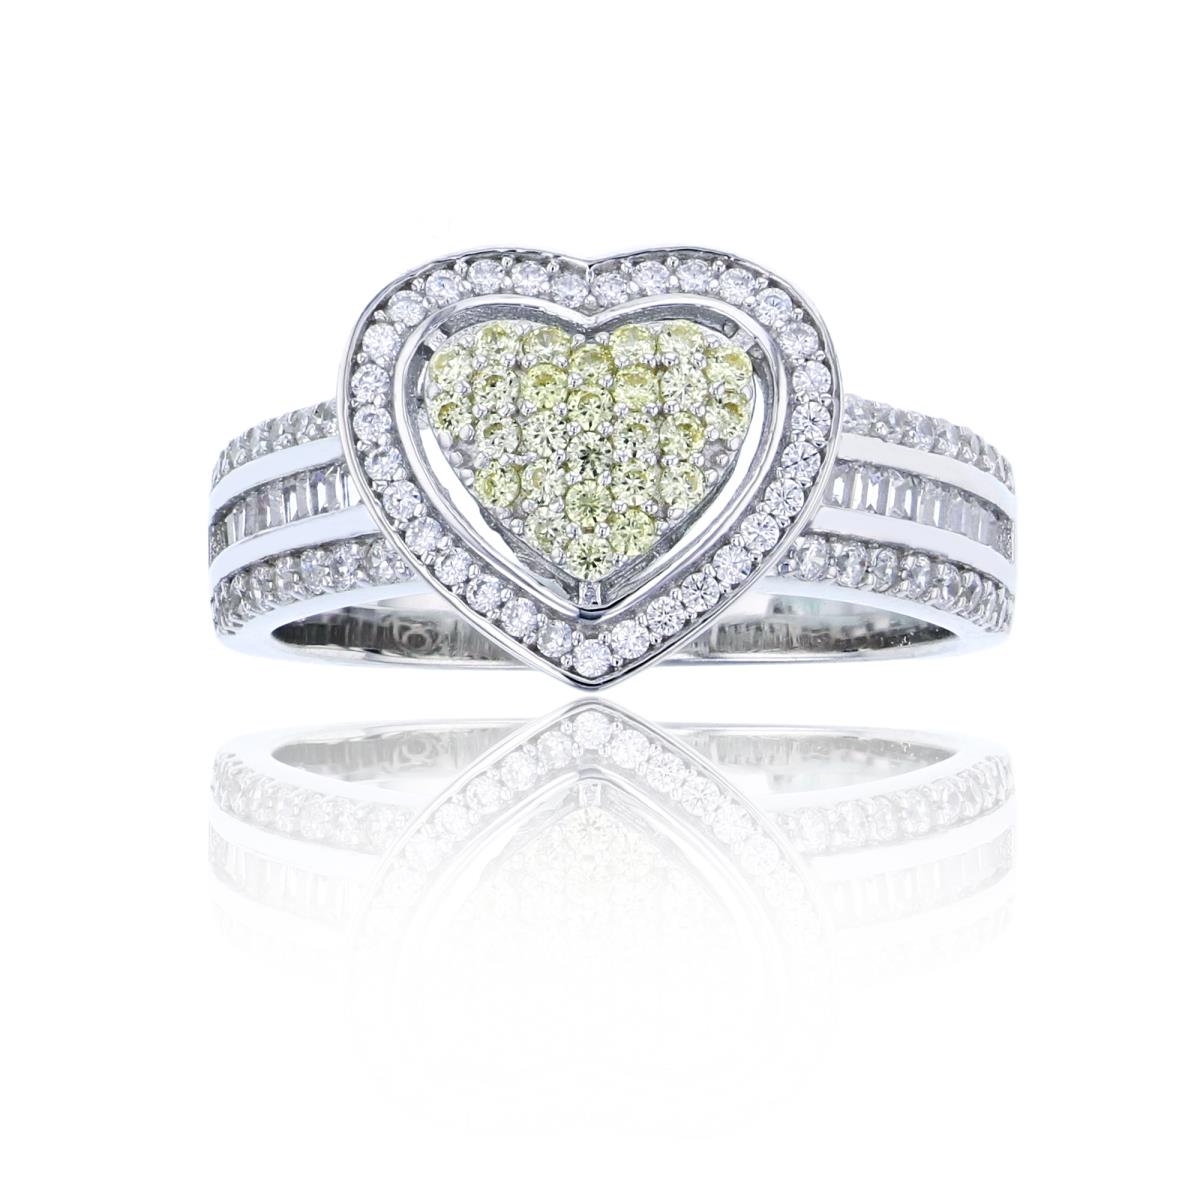 Sterling Silver Rhodium Micropav 8mm e Canary Yellow+White Rd & Baguette CZ Heart Fashion Ring